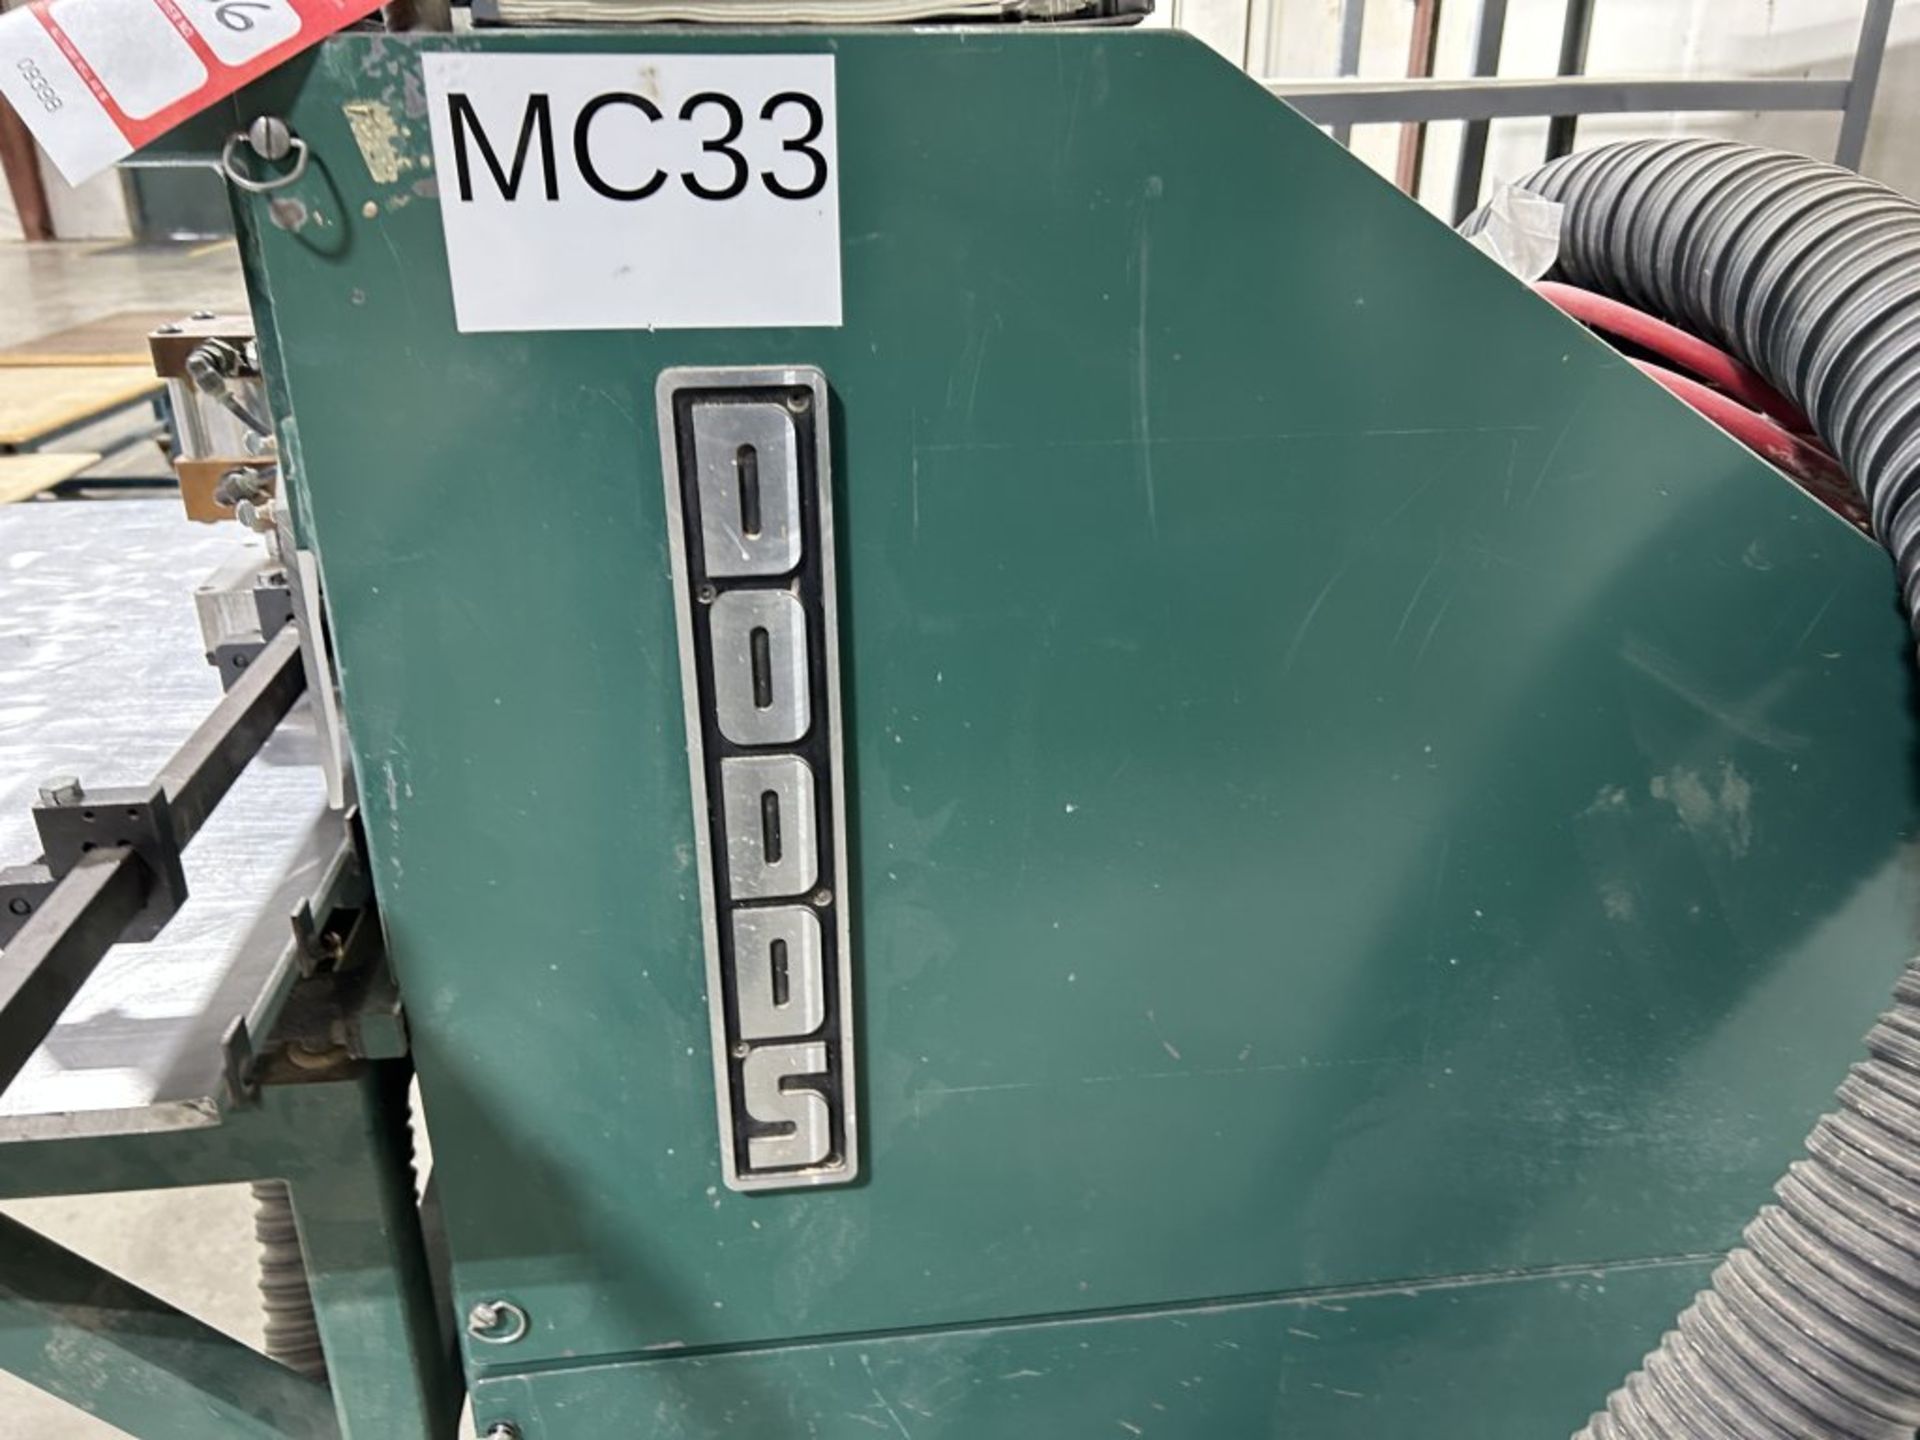 DODDS MB601 MORTISE AND BORE MACHINE, FOOT PEDAL CONTROLS, 480V, 3-PHASE, S/N: MB96123-645 - Image 8 of 10